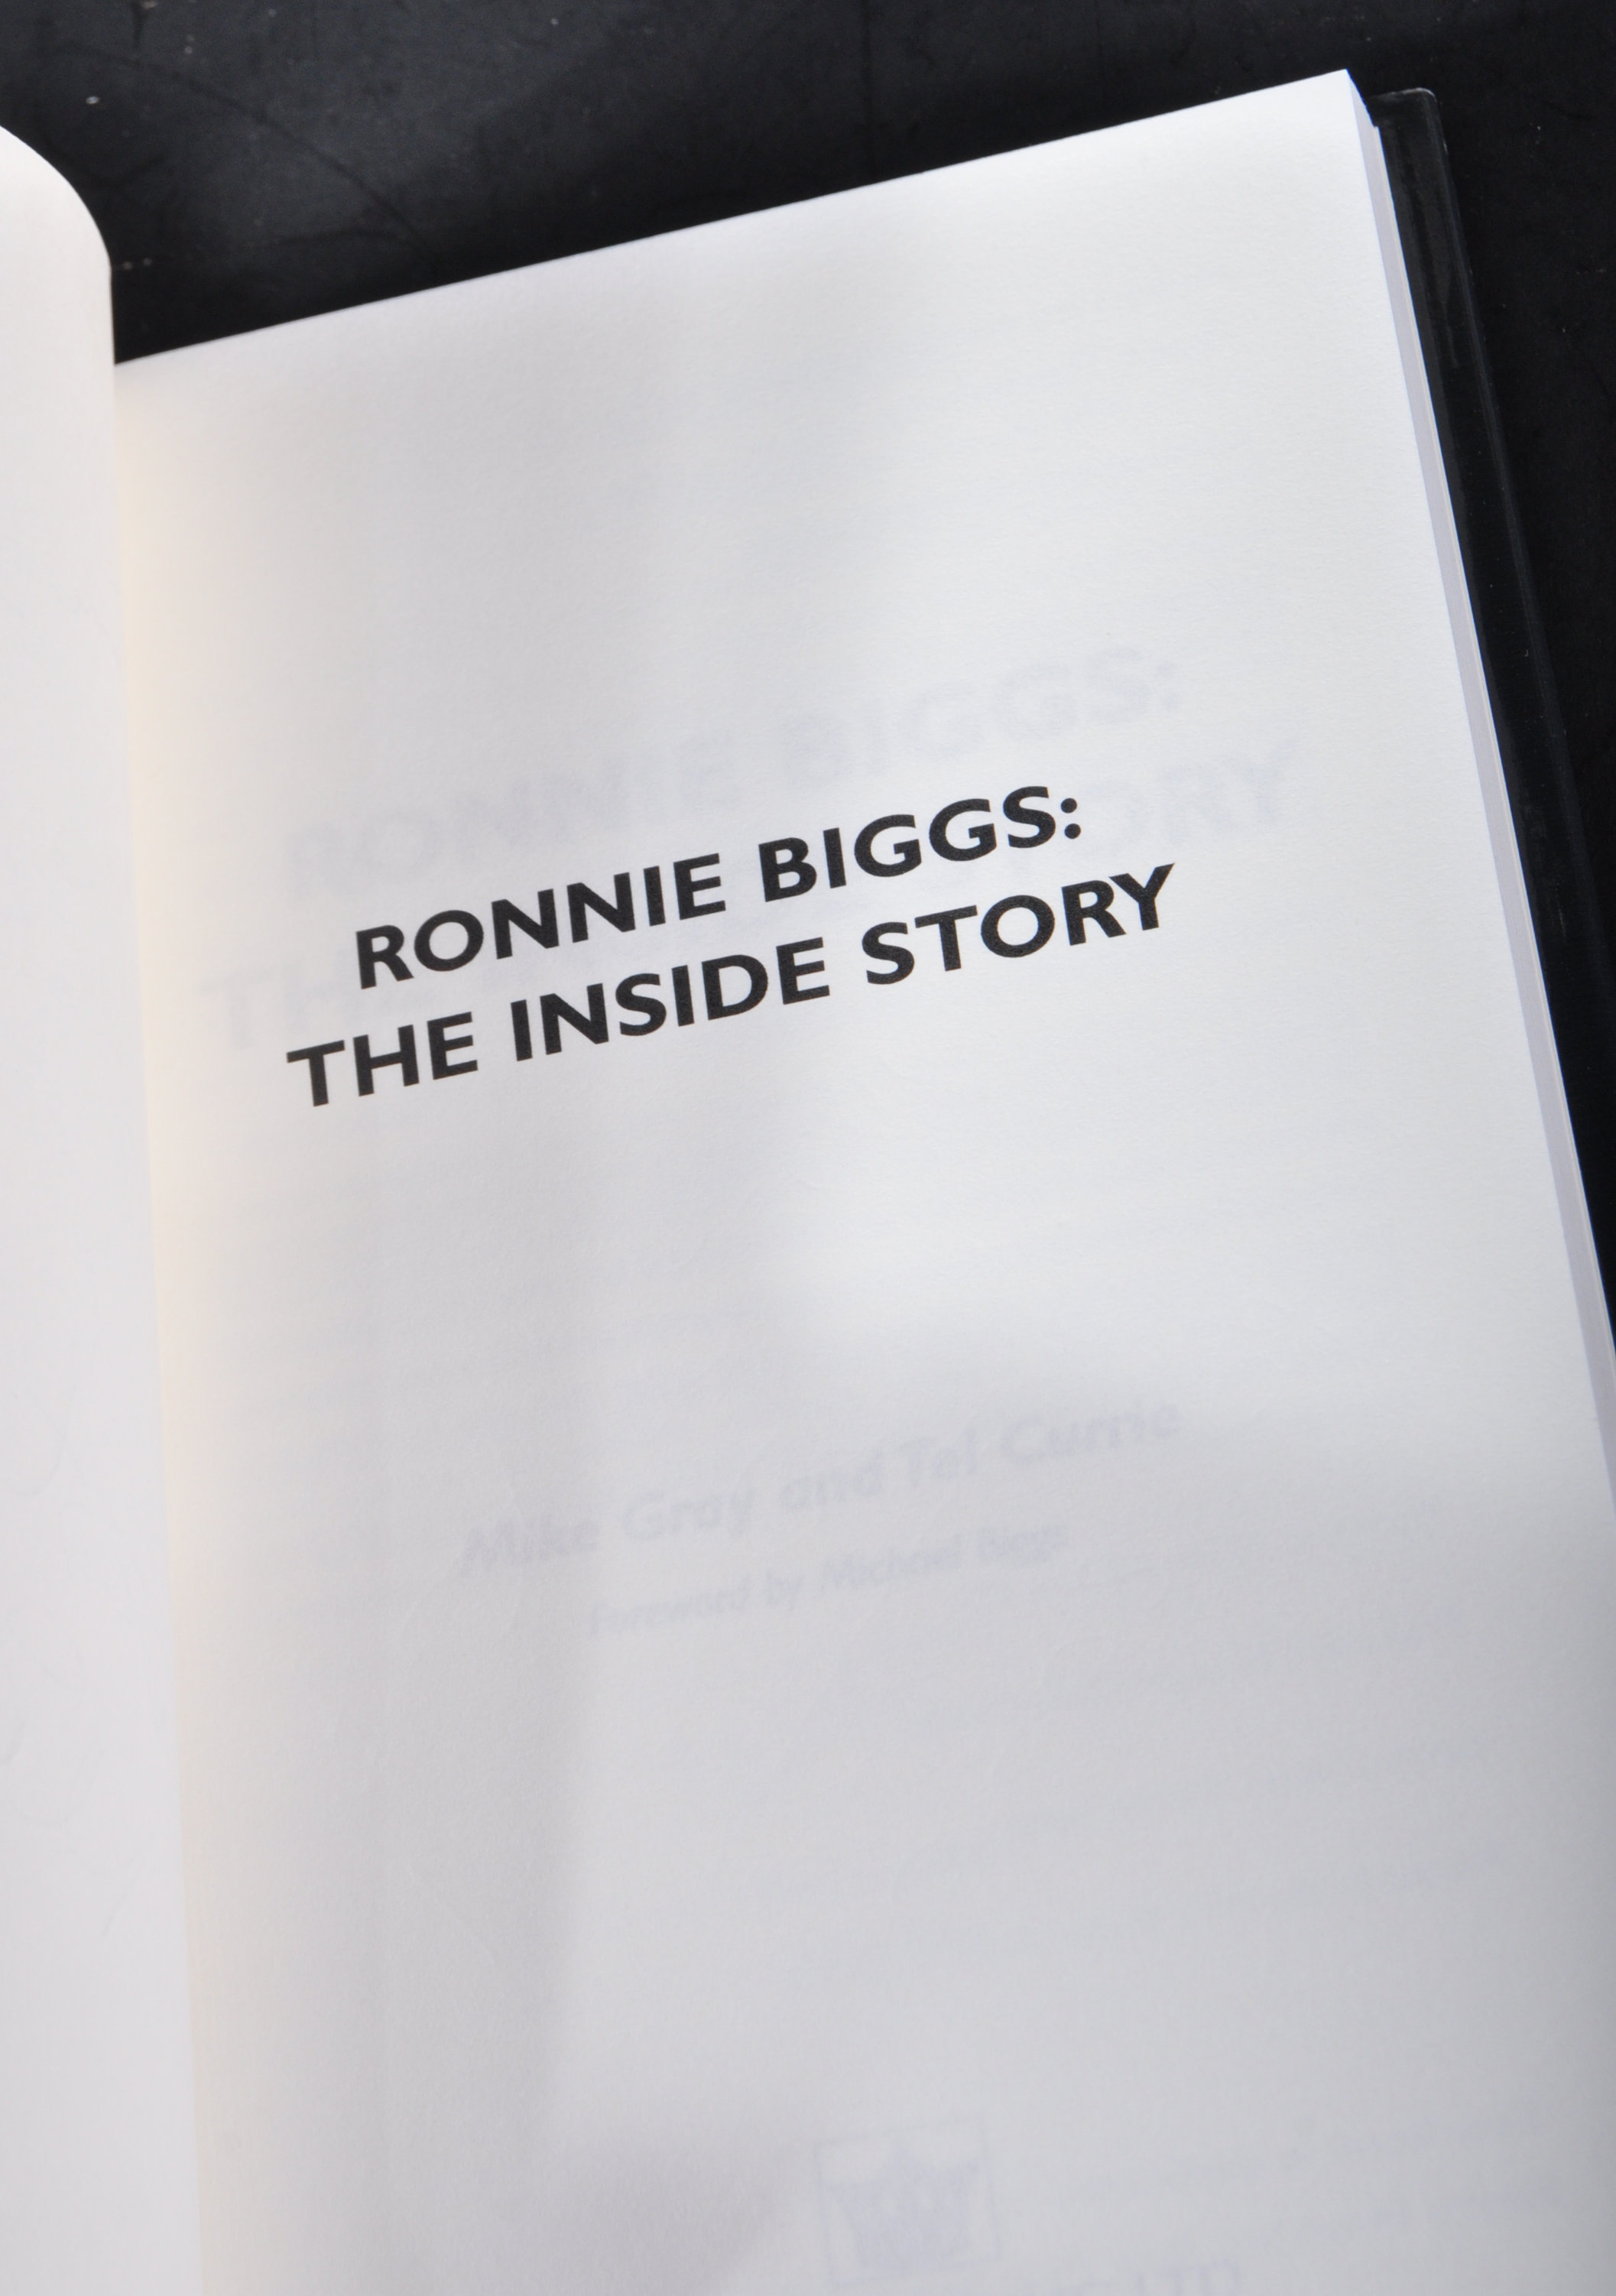 GREAT TRAIN ROBBERY - RONNIE BIGGS THE INSIDE STORY SIGNED - Image 4 of 7